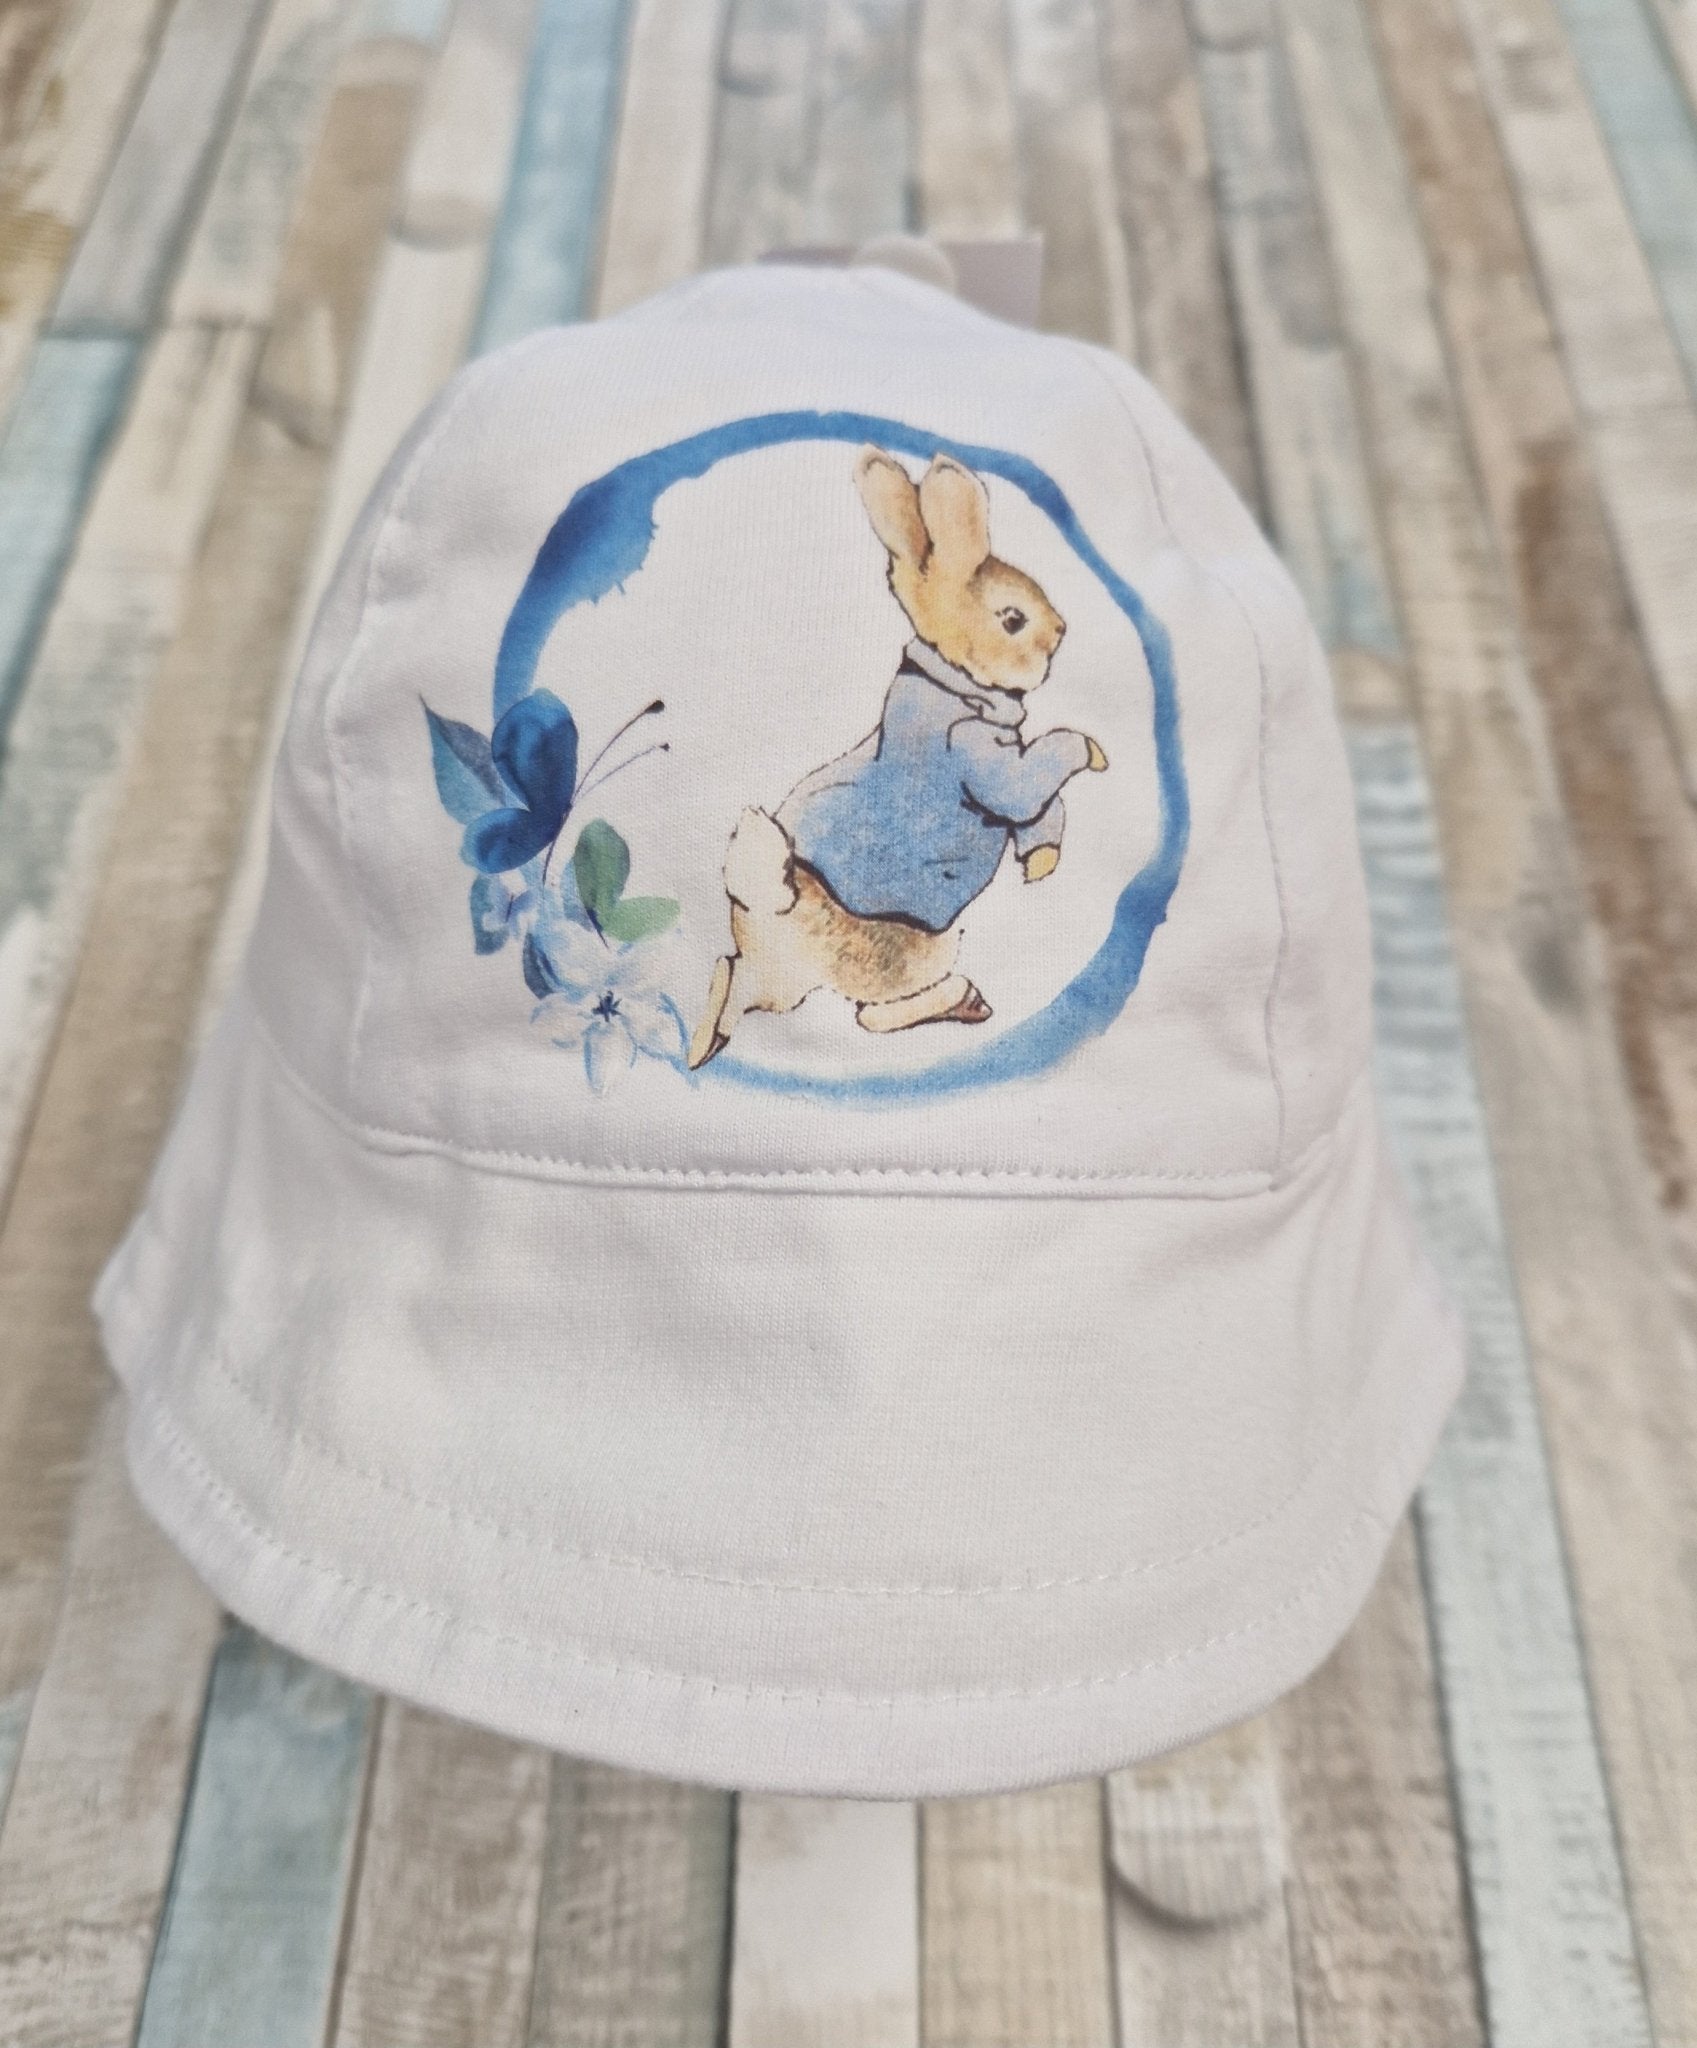 Baby Boys White Sunhat With Printed Blue Rabbit Design - Nana B Baby & Childrenswear Boutique